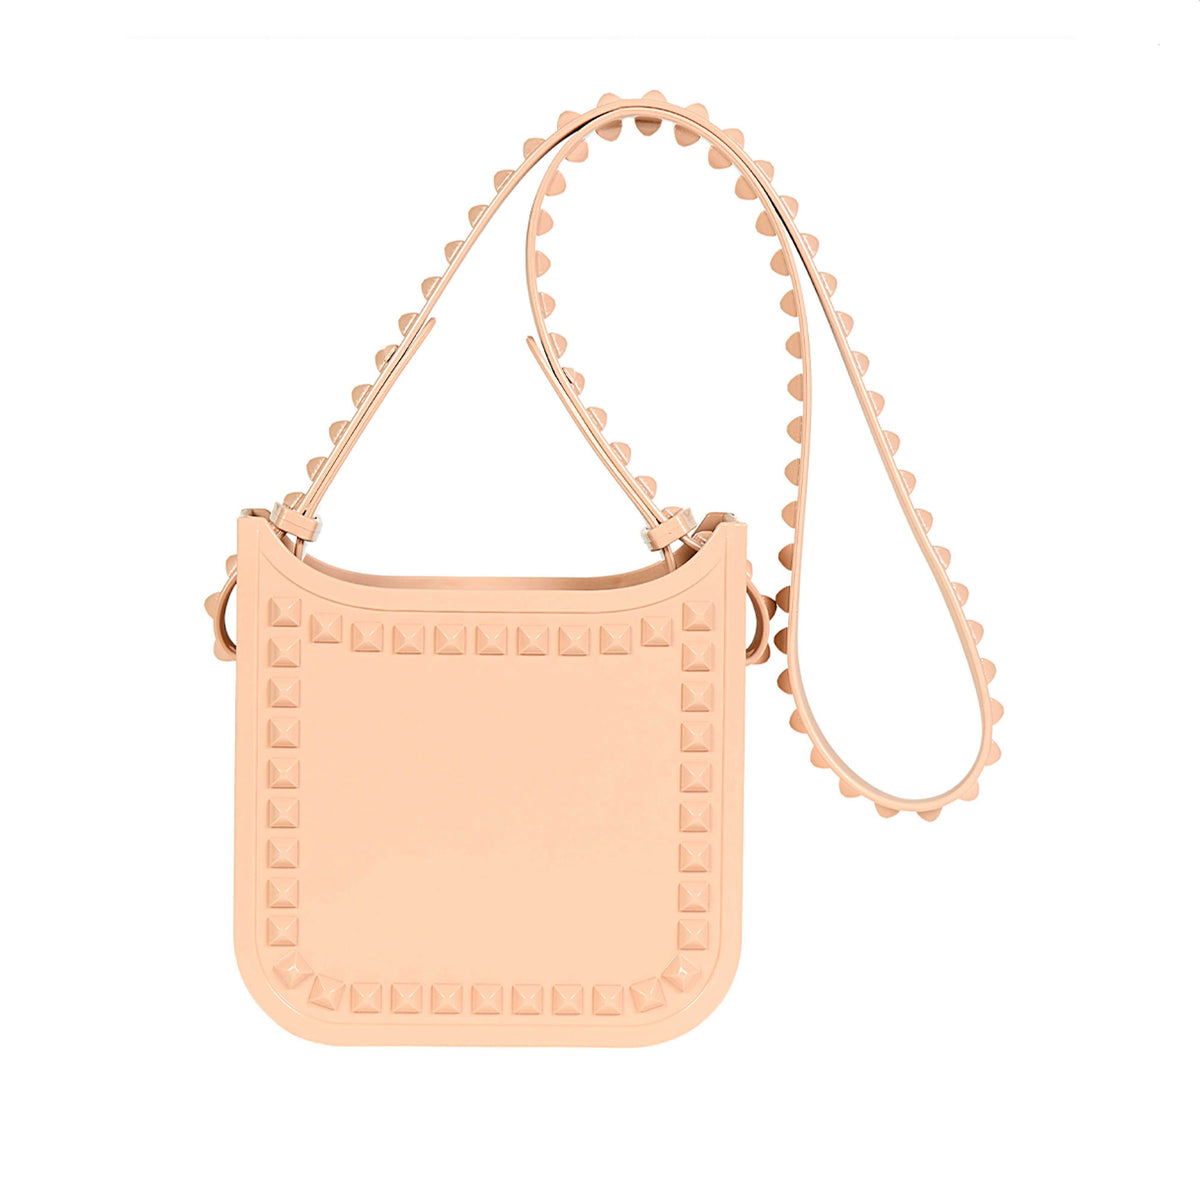 Lisa beach bags for women in color blush